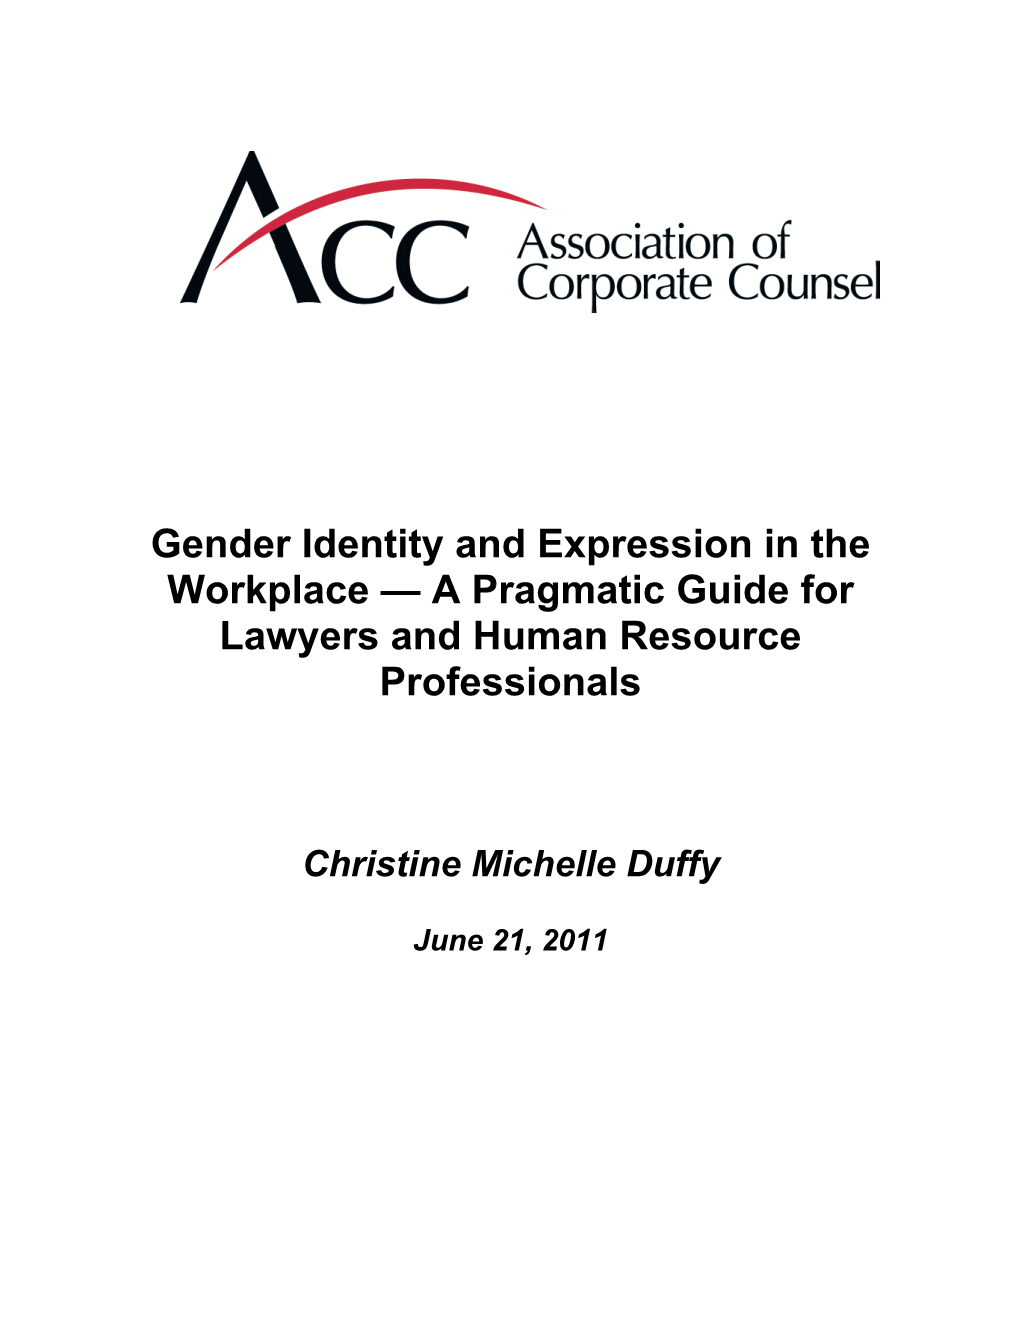 Gender Identity and Expression in the Workplace – a Pragmatic Guide For